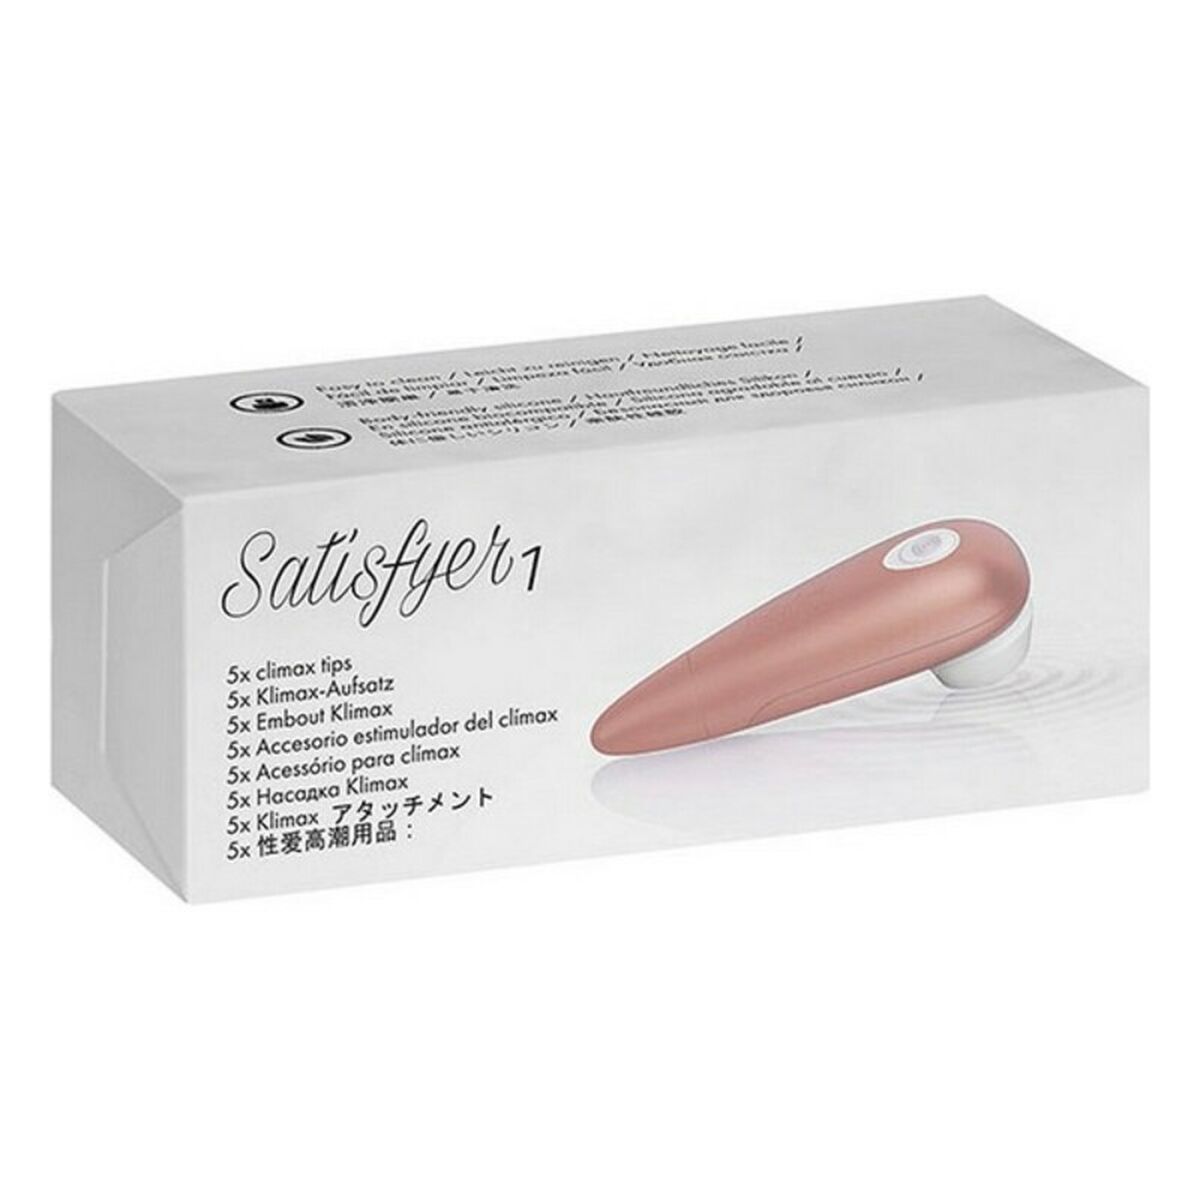 Next Generation 1 Climax Accessory Satisfyer 015078TO White